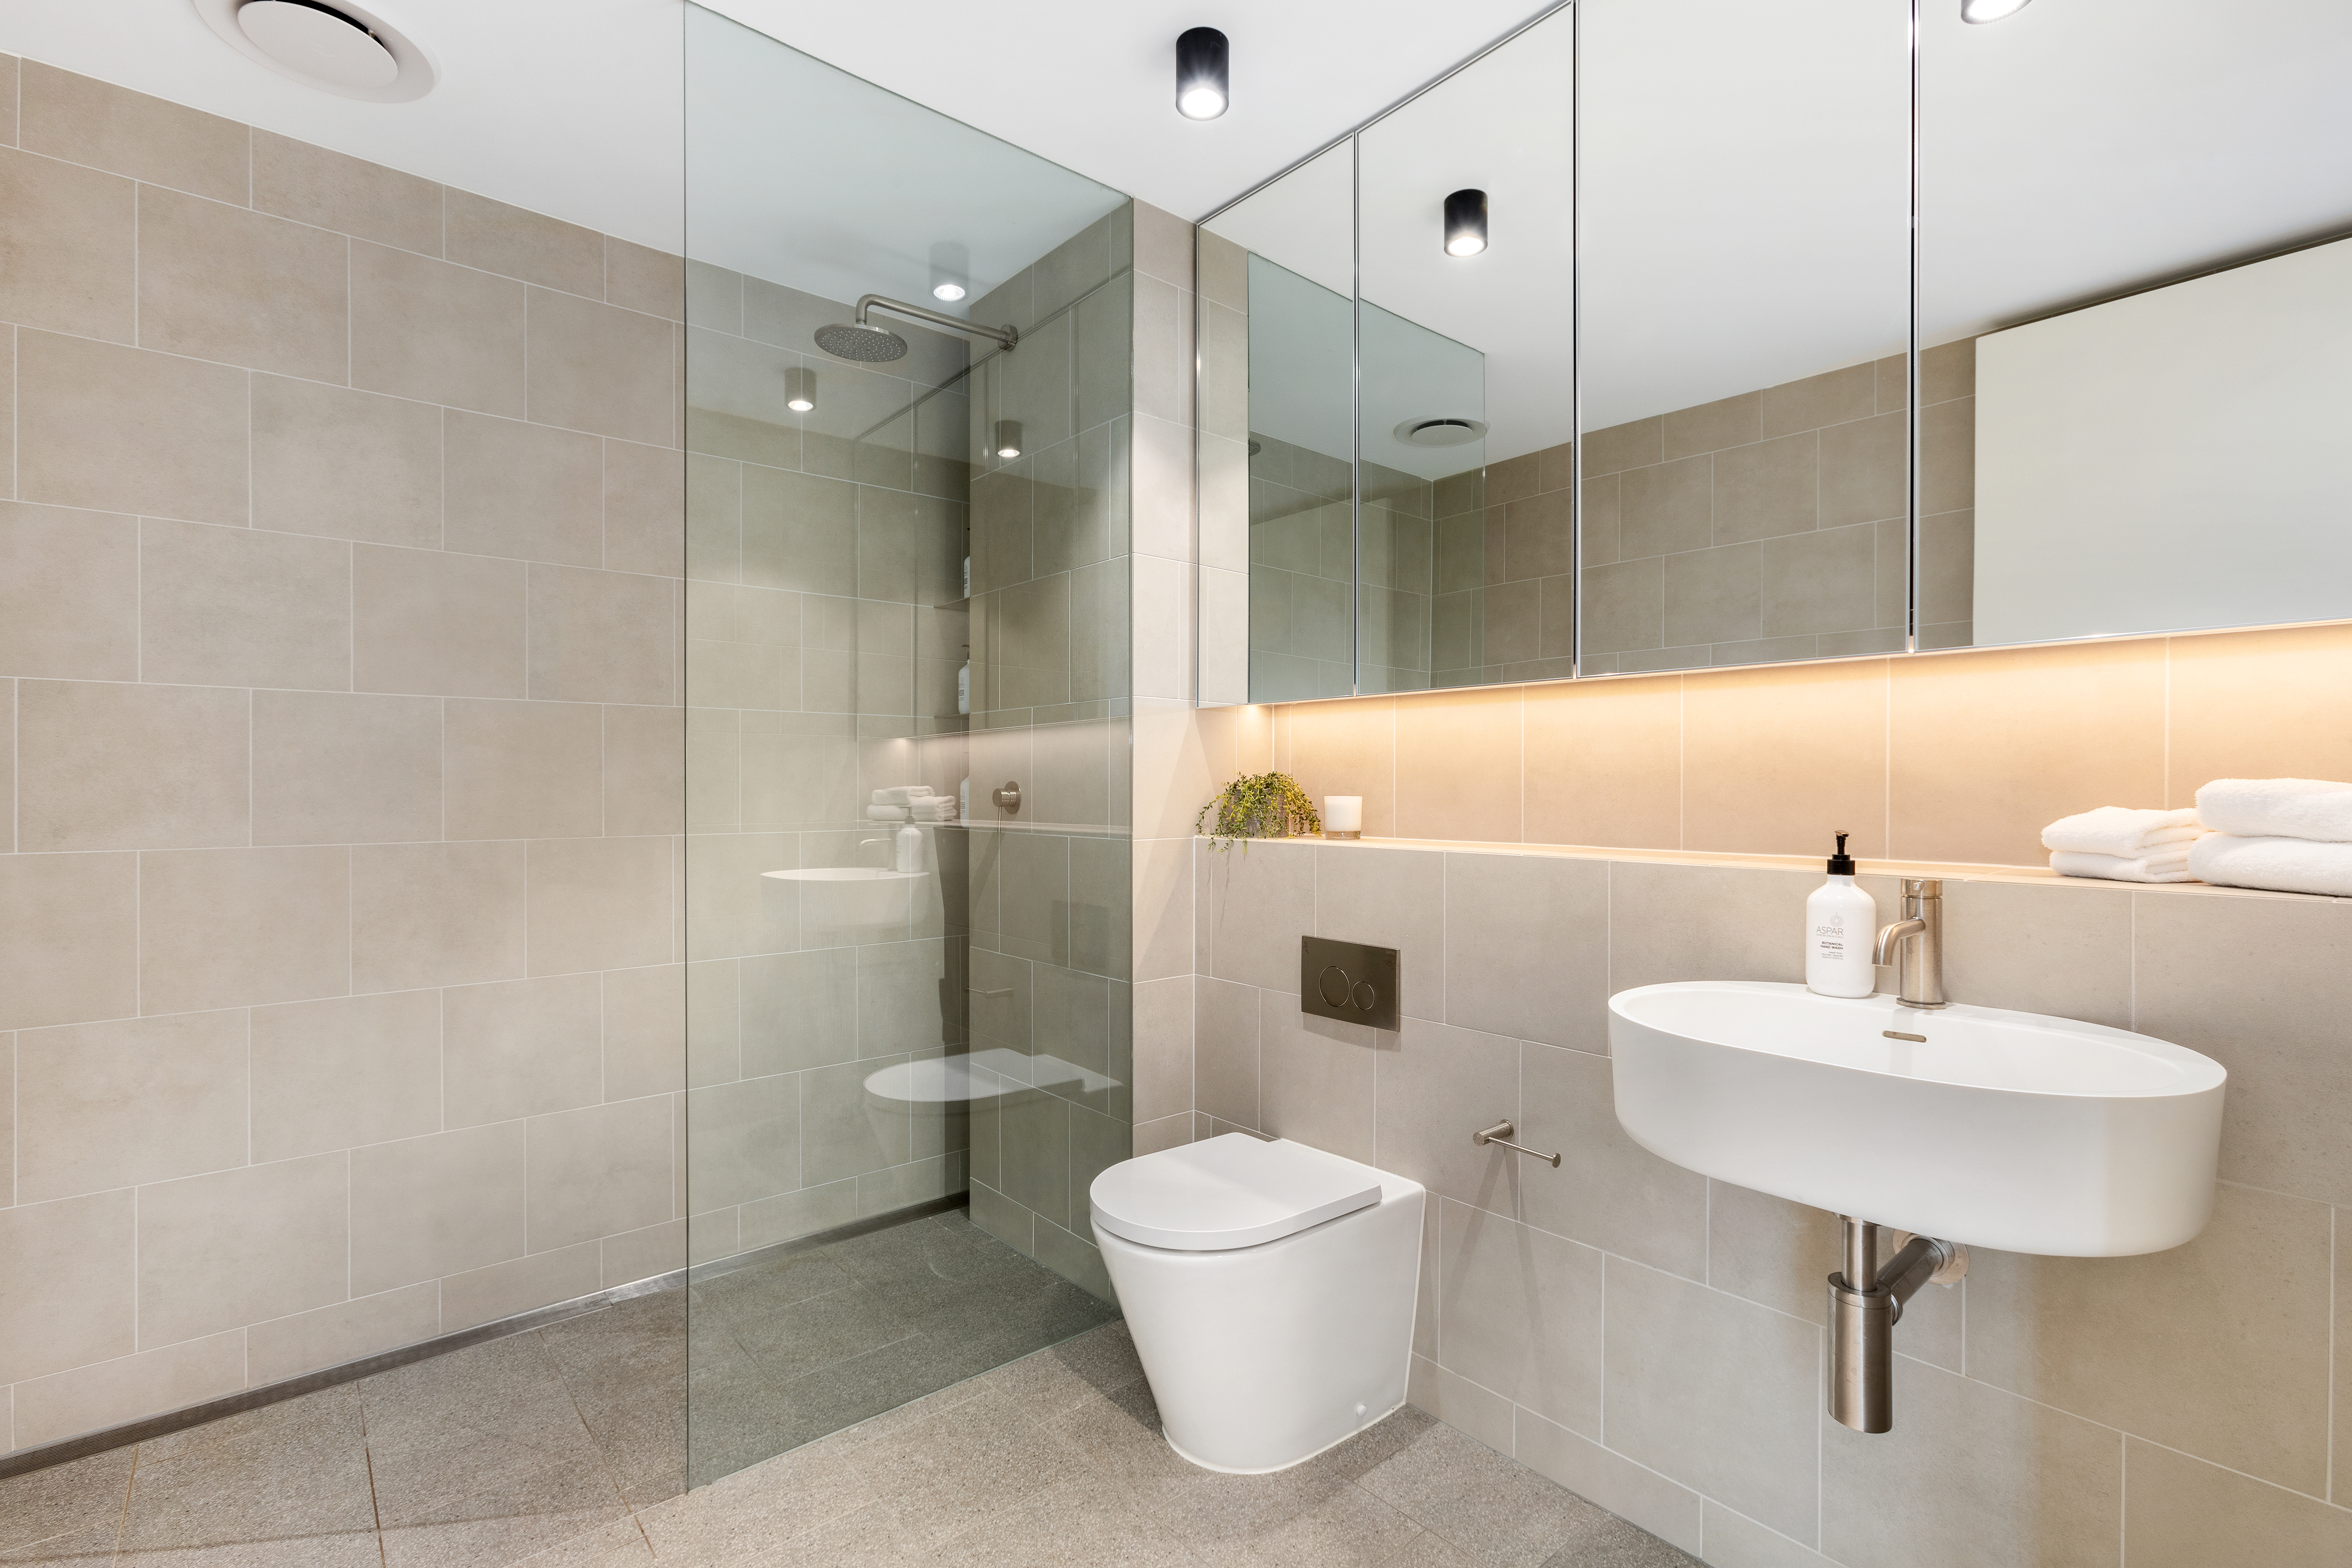 Bathroom - Two Bedroom Apartment - Urban Rest - The Surry Apartments - Sydney